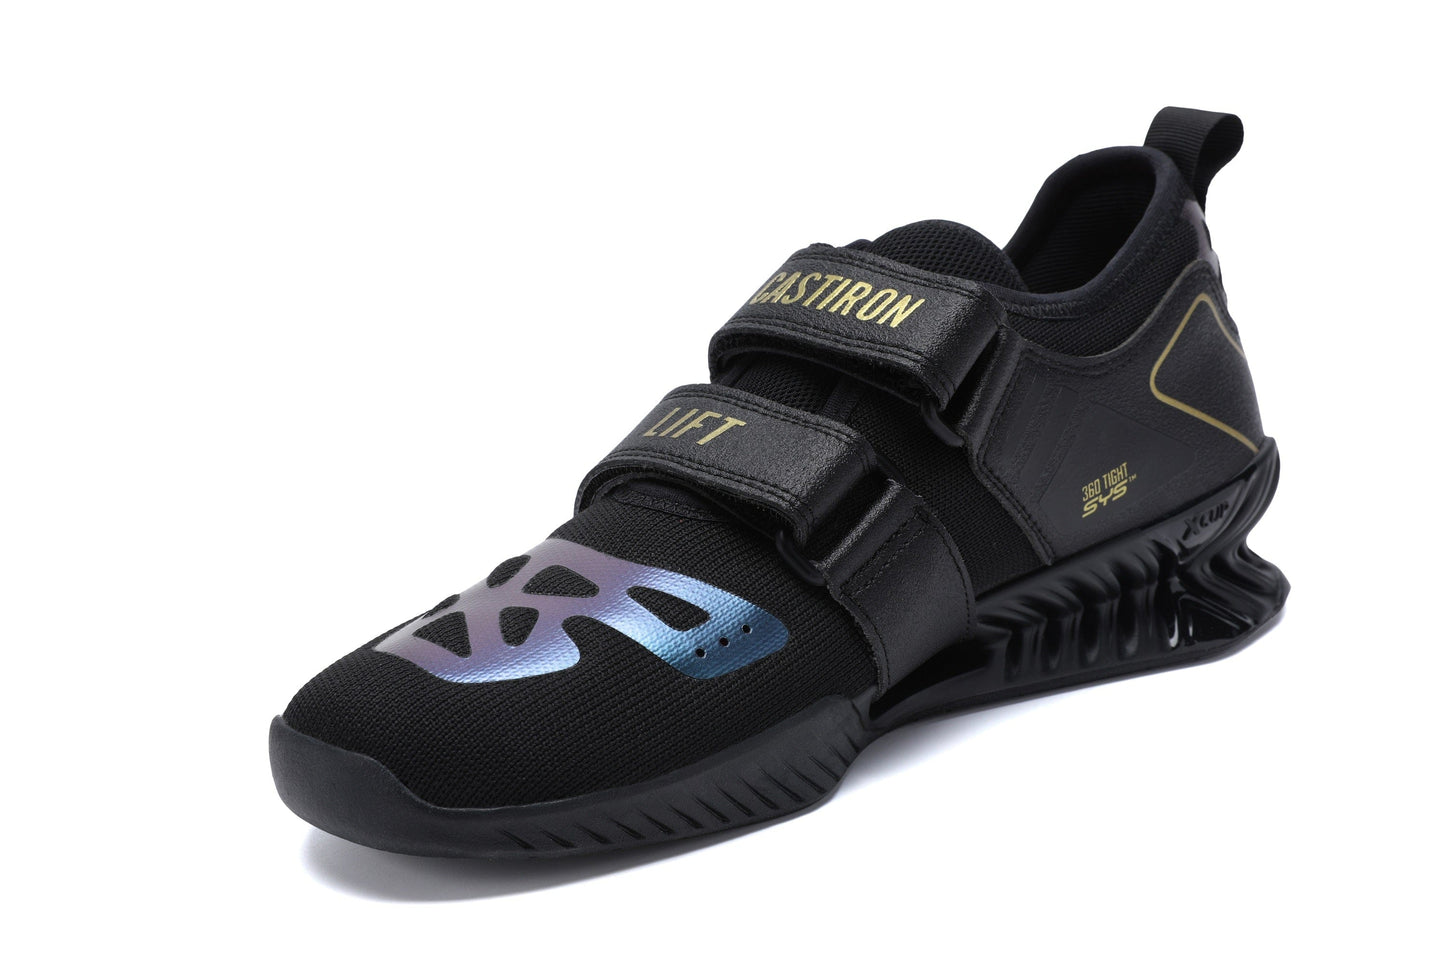 Unisex Weightlifting Shoes | Best Weightlifting Shoes | Castiron Lift